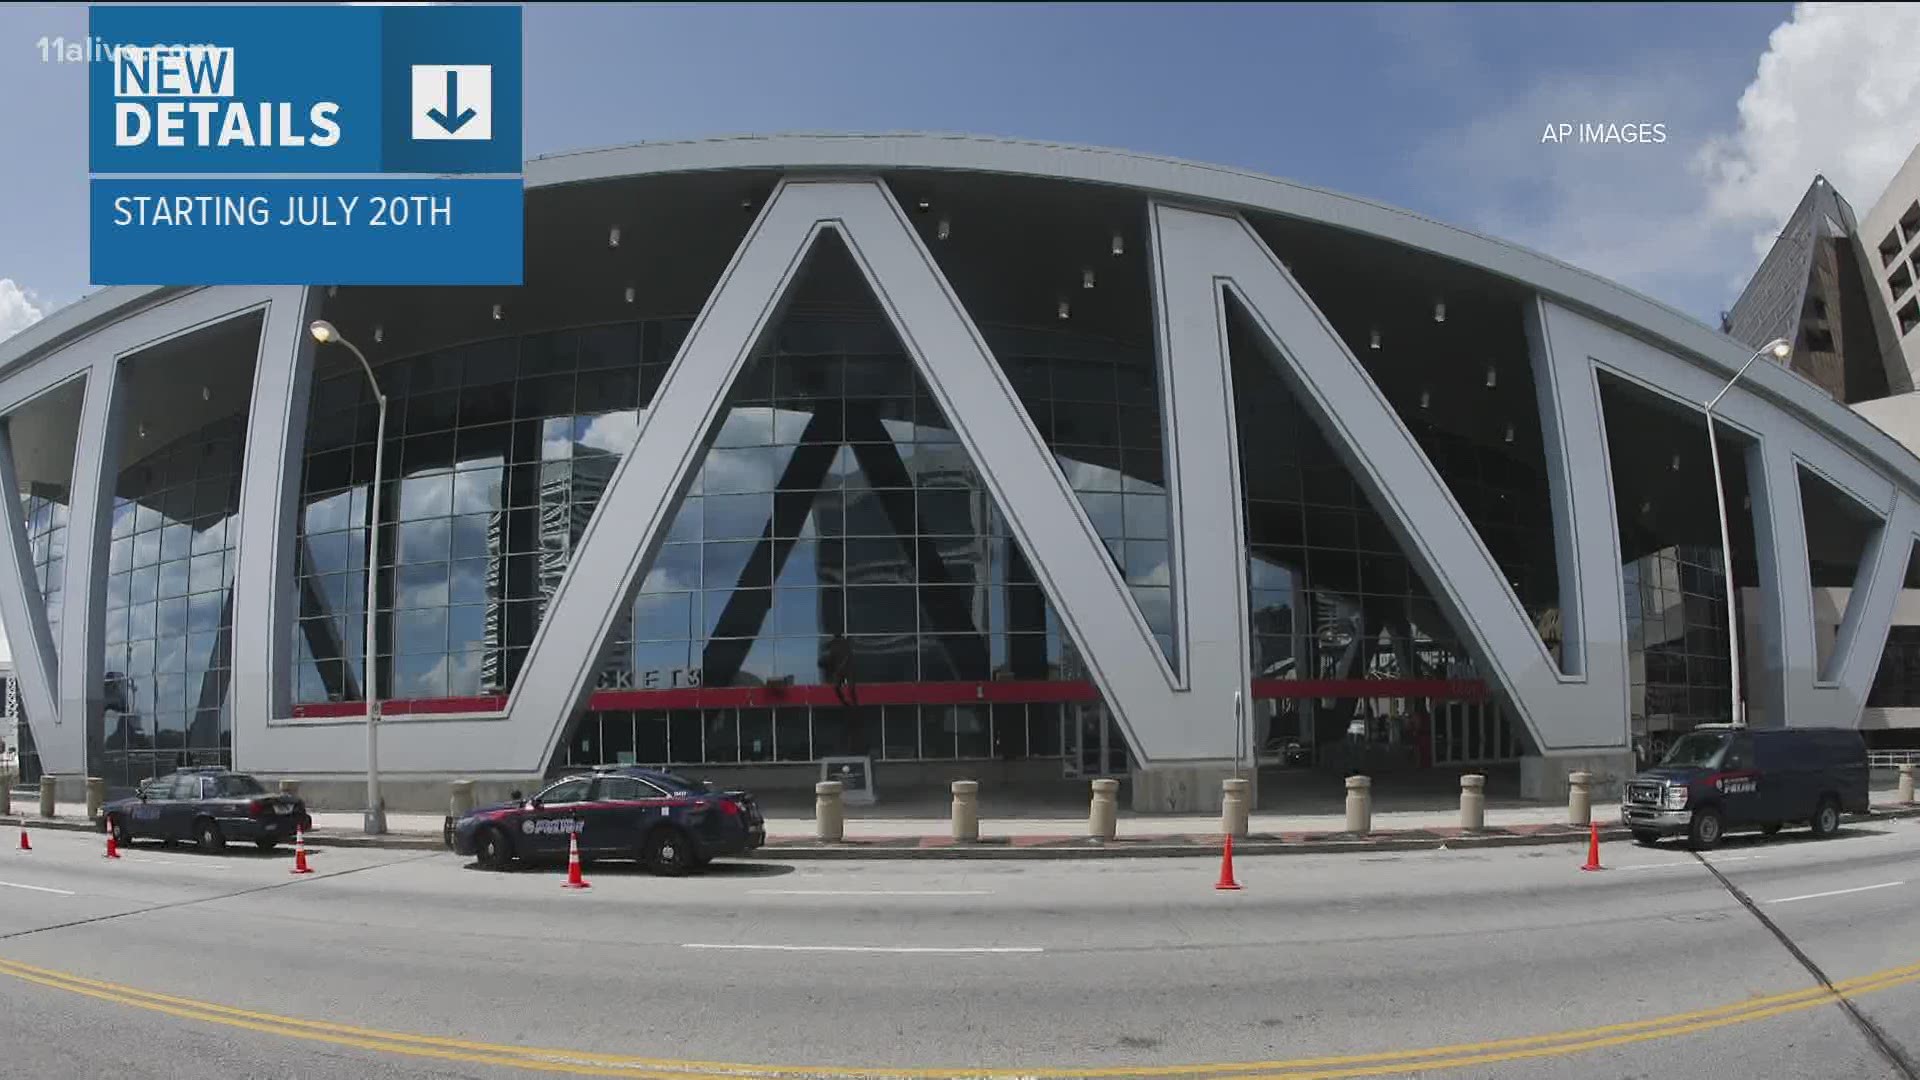 The precinct will allow early voters to use State Farm Arena to cast their ballot for the Primary runoff as well as the General election this fall.